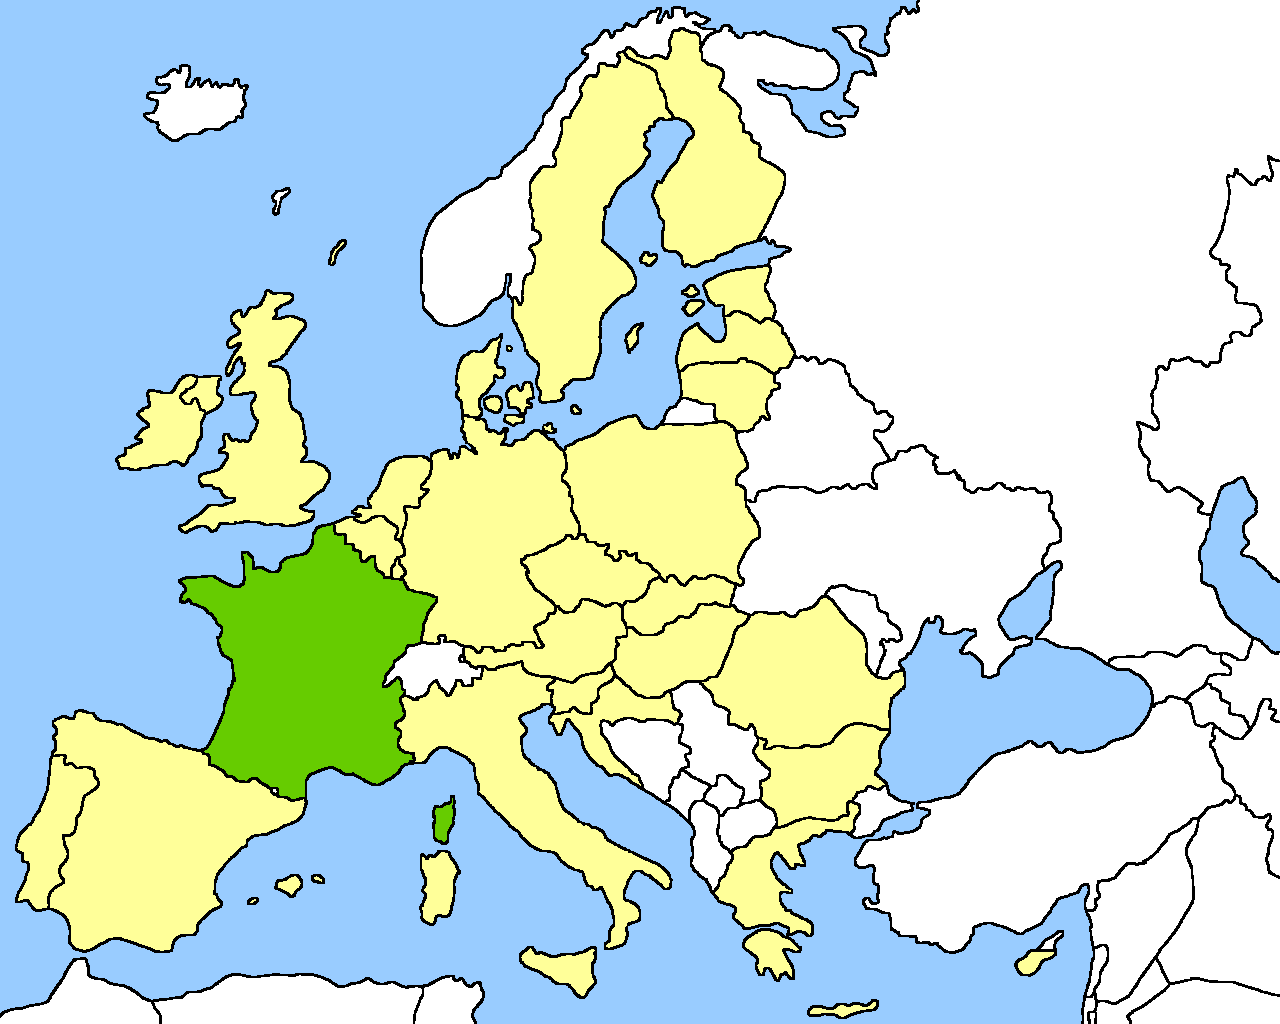 Location map, France in the EU